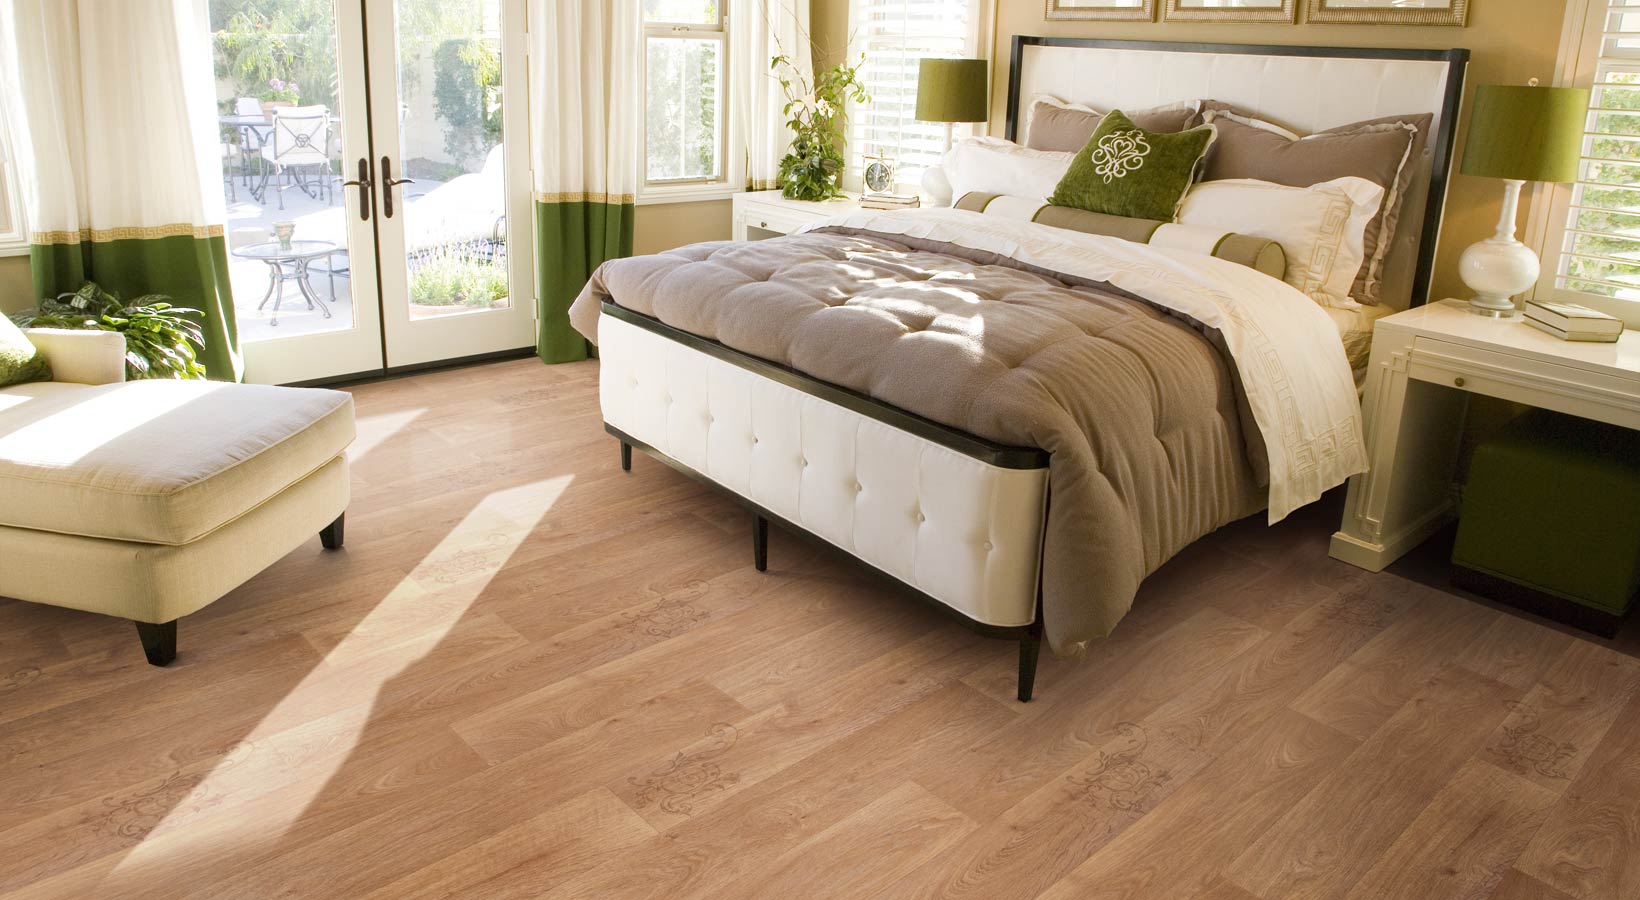 10 materials for finishing the floor in the bedroom